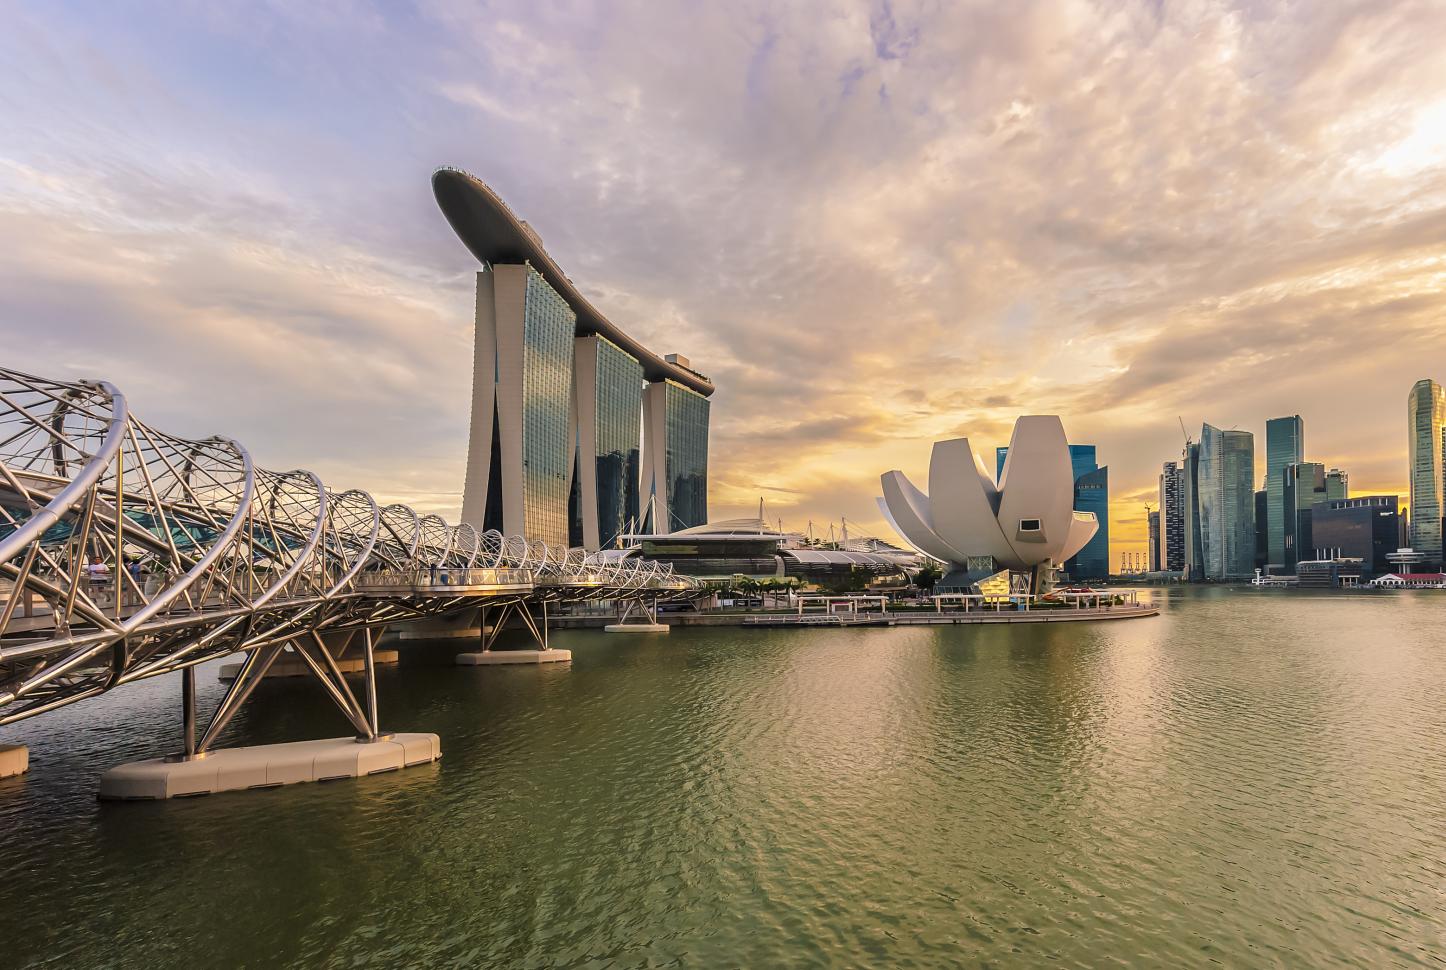 DBS: Travel and Tourism – Singapore plans for further easing of travel restrictions and domestic health protocols once Omicron subsides